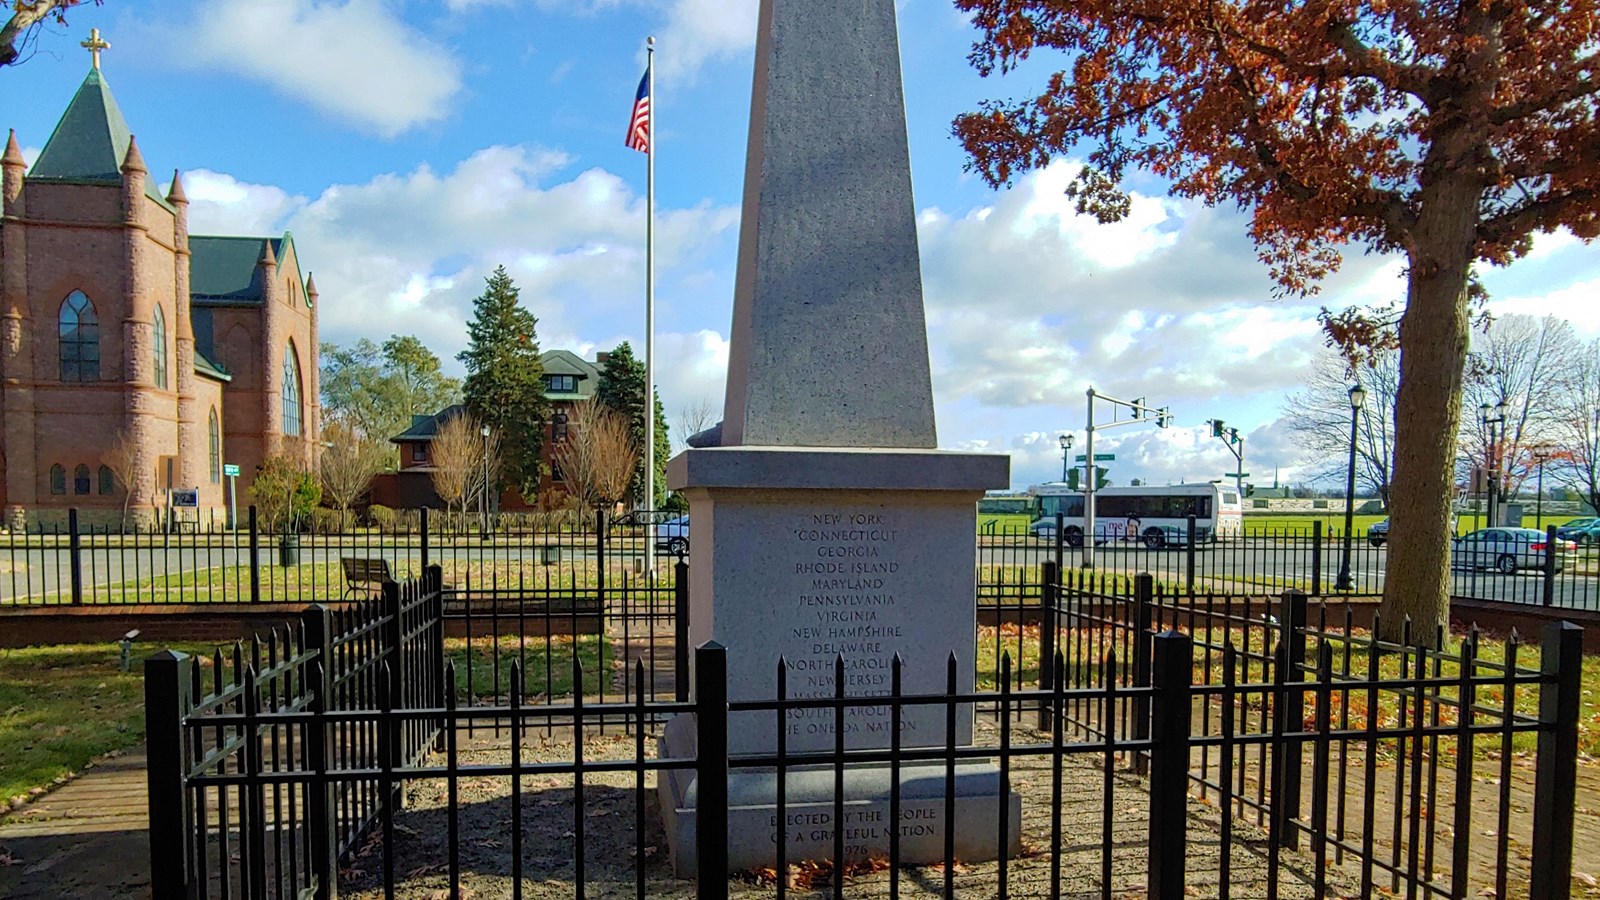 A tall obelisk with an iron fence surrounding it.